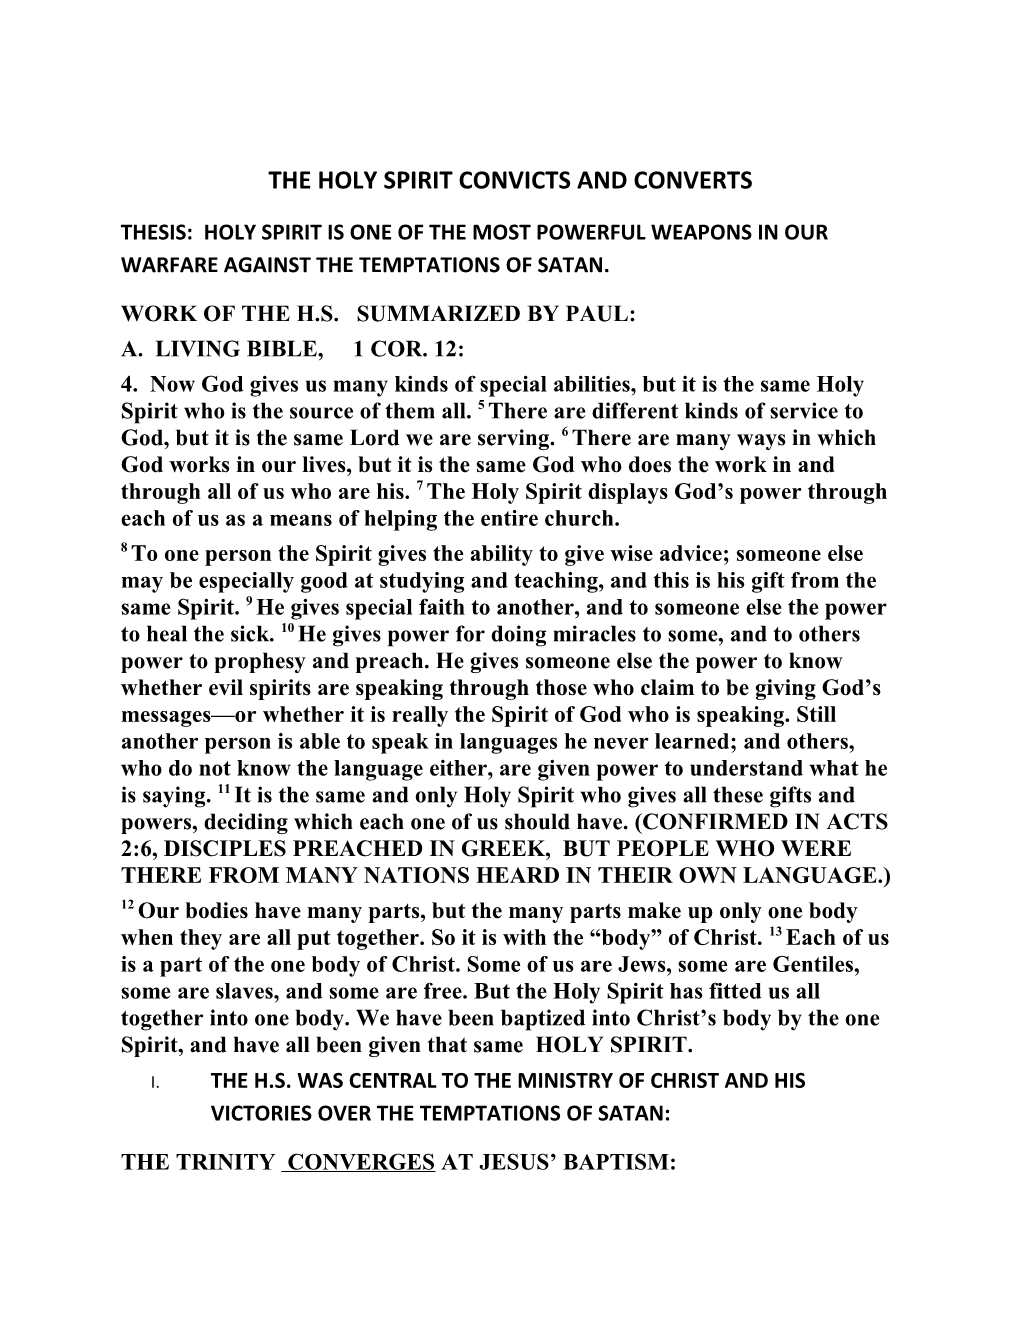 The Holy Spirit Convicts and Converts